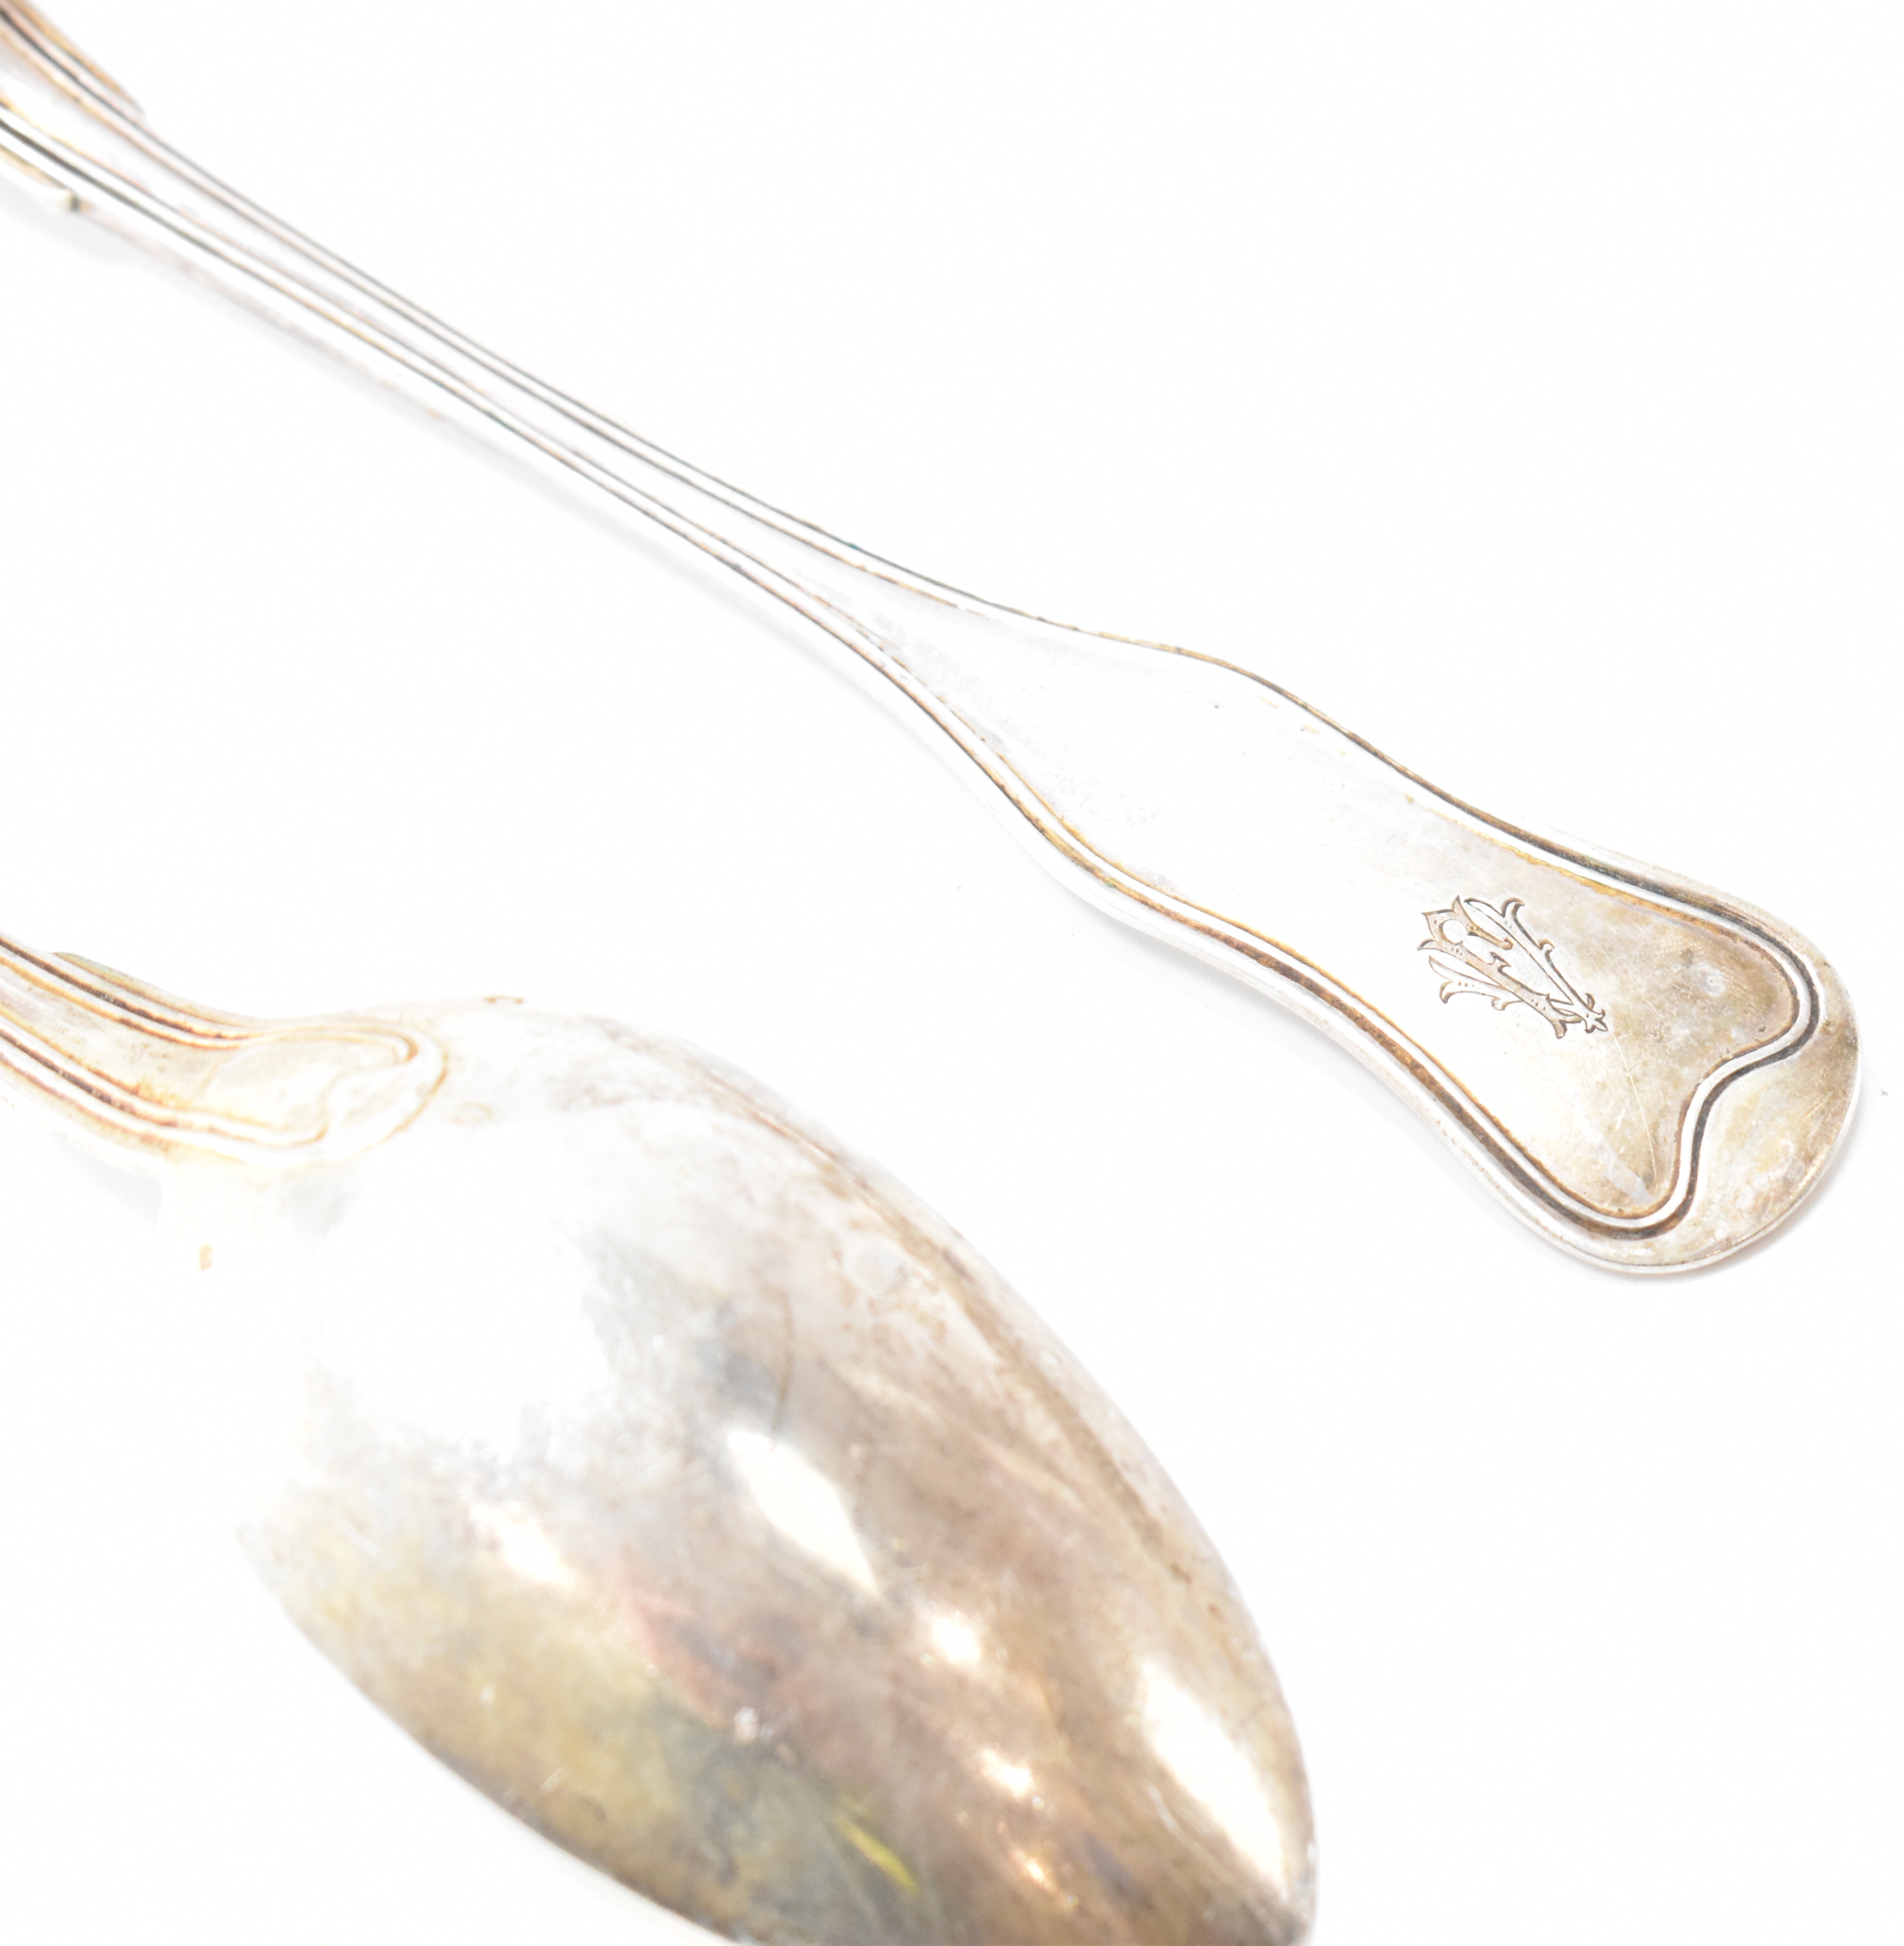 PAIR OF ANTIQUE AUSTRO HUNGARIAN SILVER SERVING SPOONS - Image 3 of 5